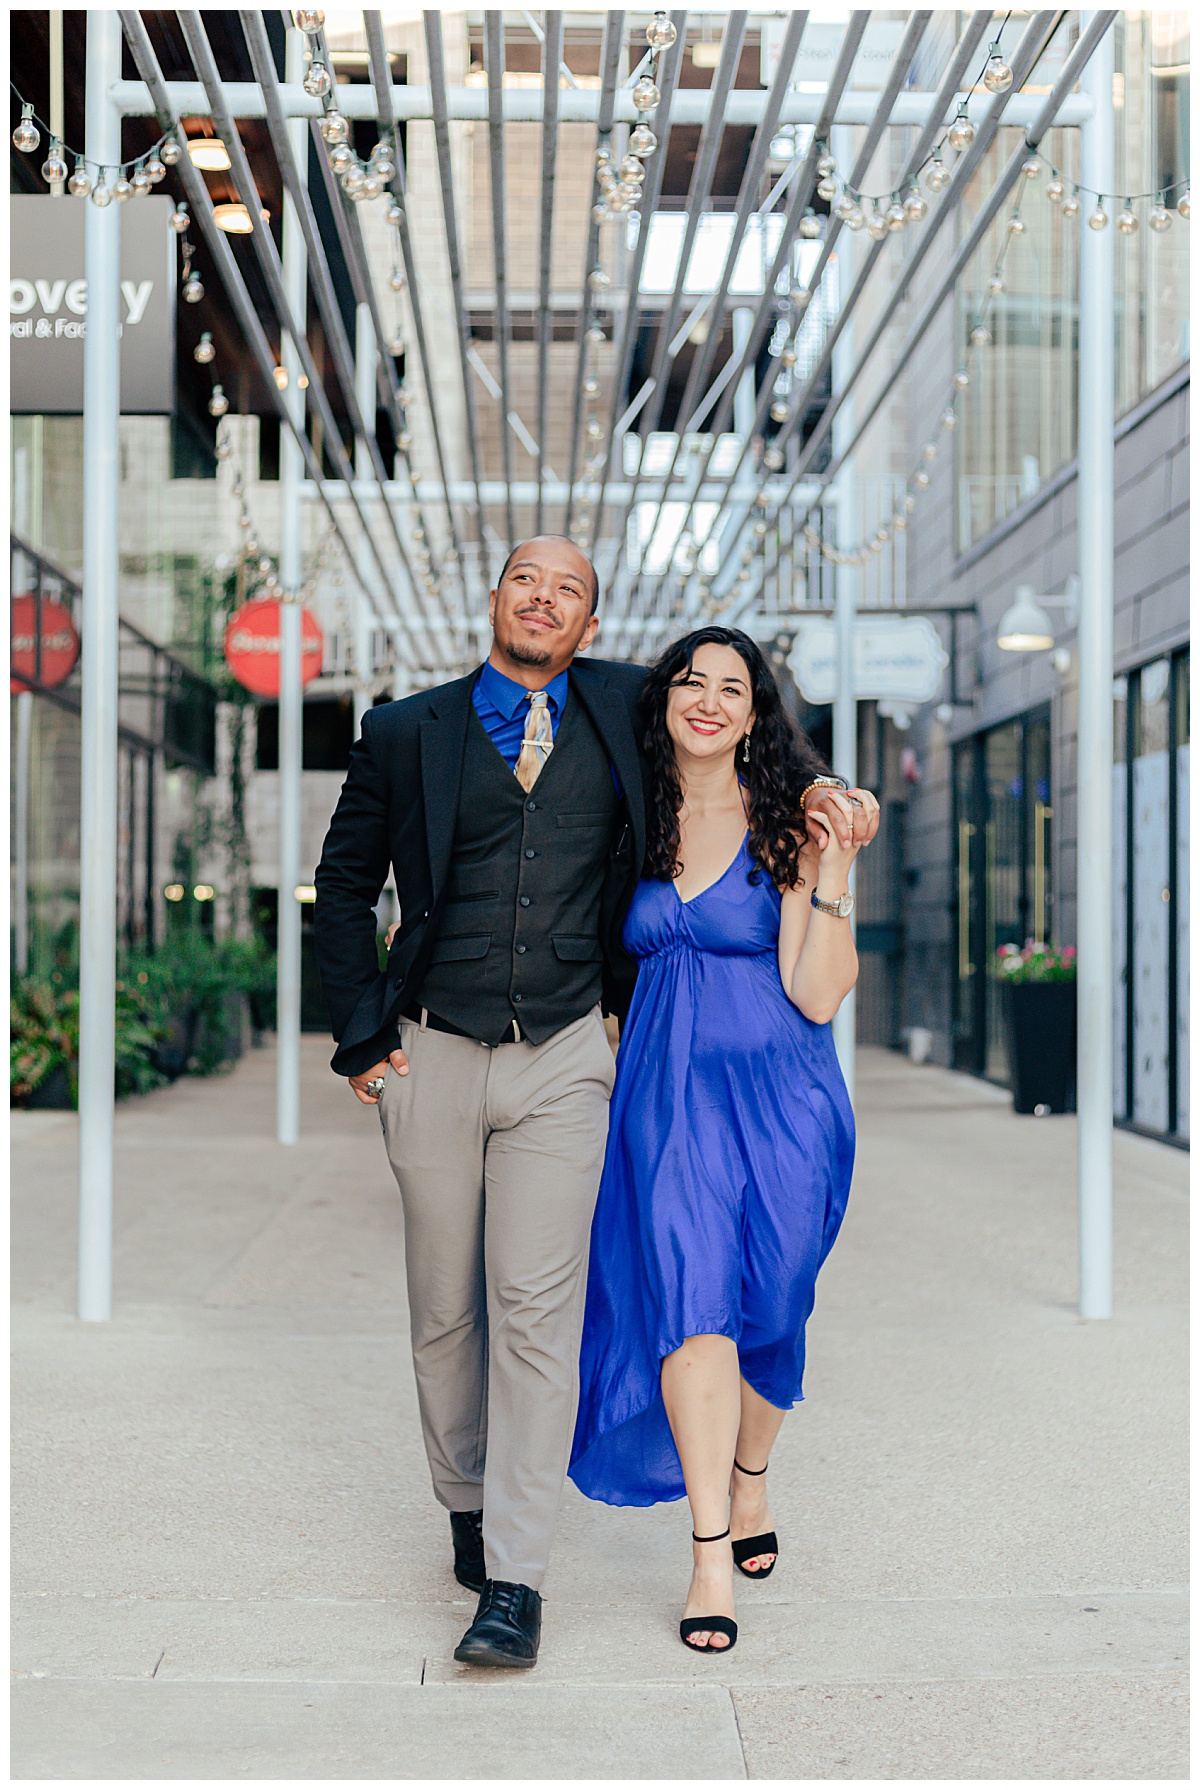 man has arm around woman who is holding his hand while they walk by Ellie Chavez Photography